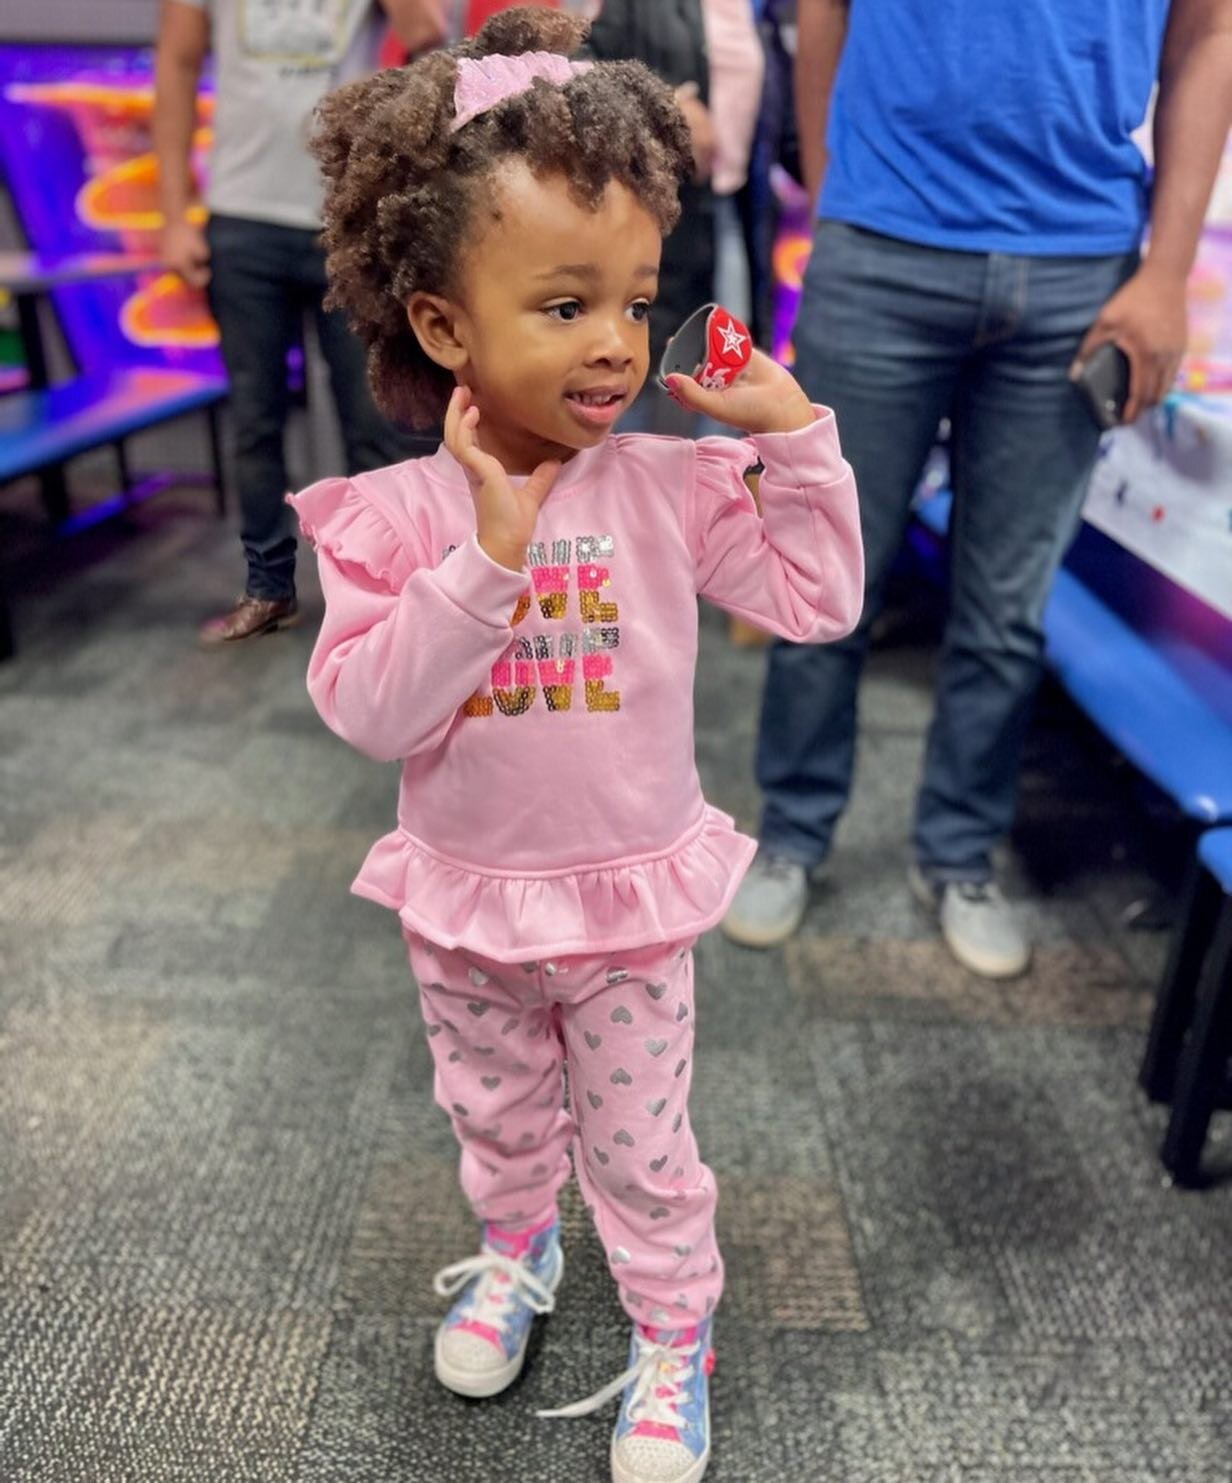 It&rsquo;s a Soielle birthday! 🗣️🗣️🥳🥳 This Soielle baby turns 3 today!!! We are so blessed to have her. Give her a big birthday shoutout in the comments 👏🏾👏🏾 Show her some love today 💕🎂🎉🎊 #soielle #soiellebabies #birthday #happybirthday #